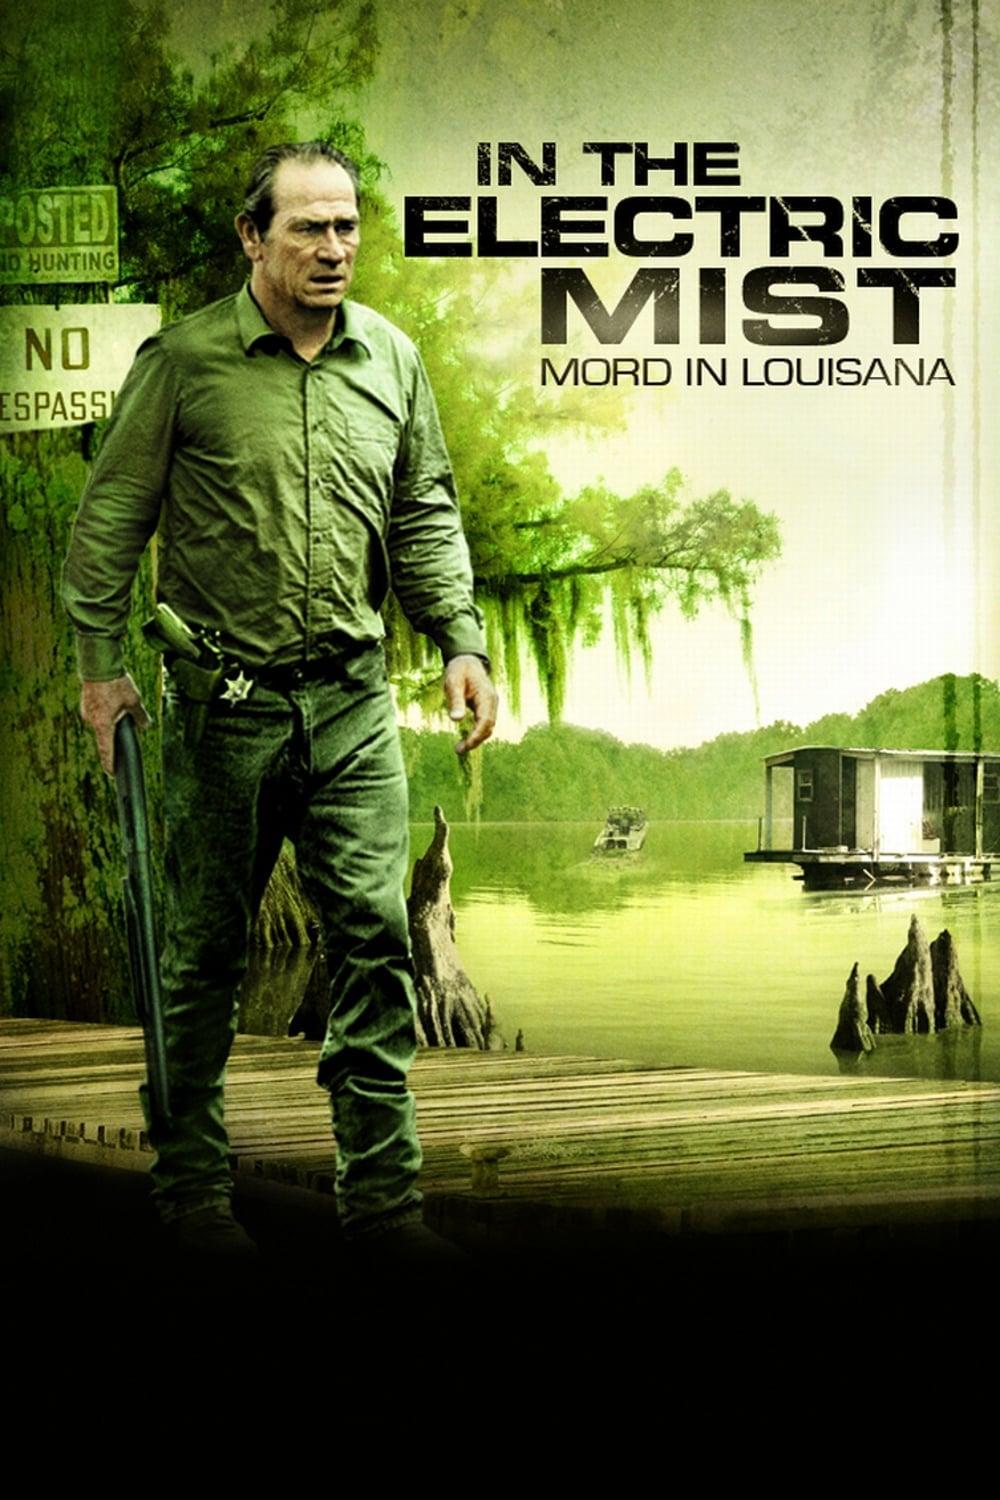 In the Electric Mist - Mord in Louisiana poster